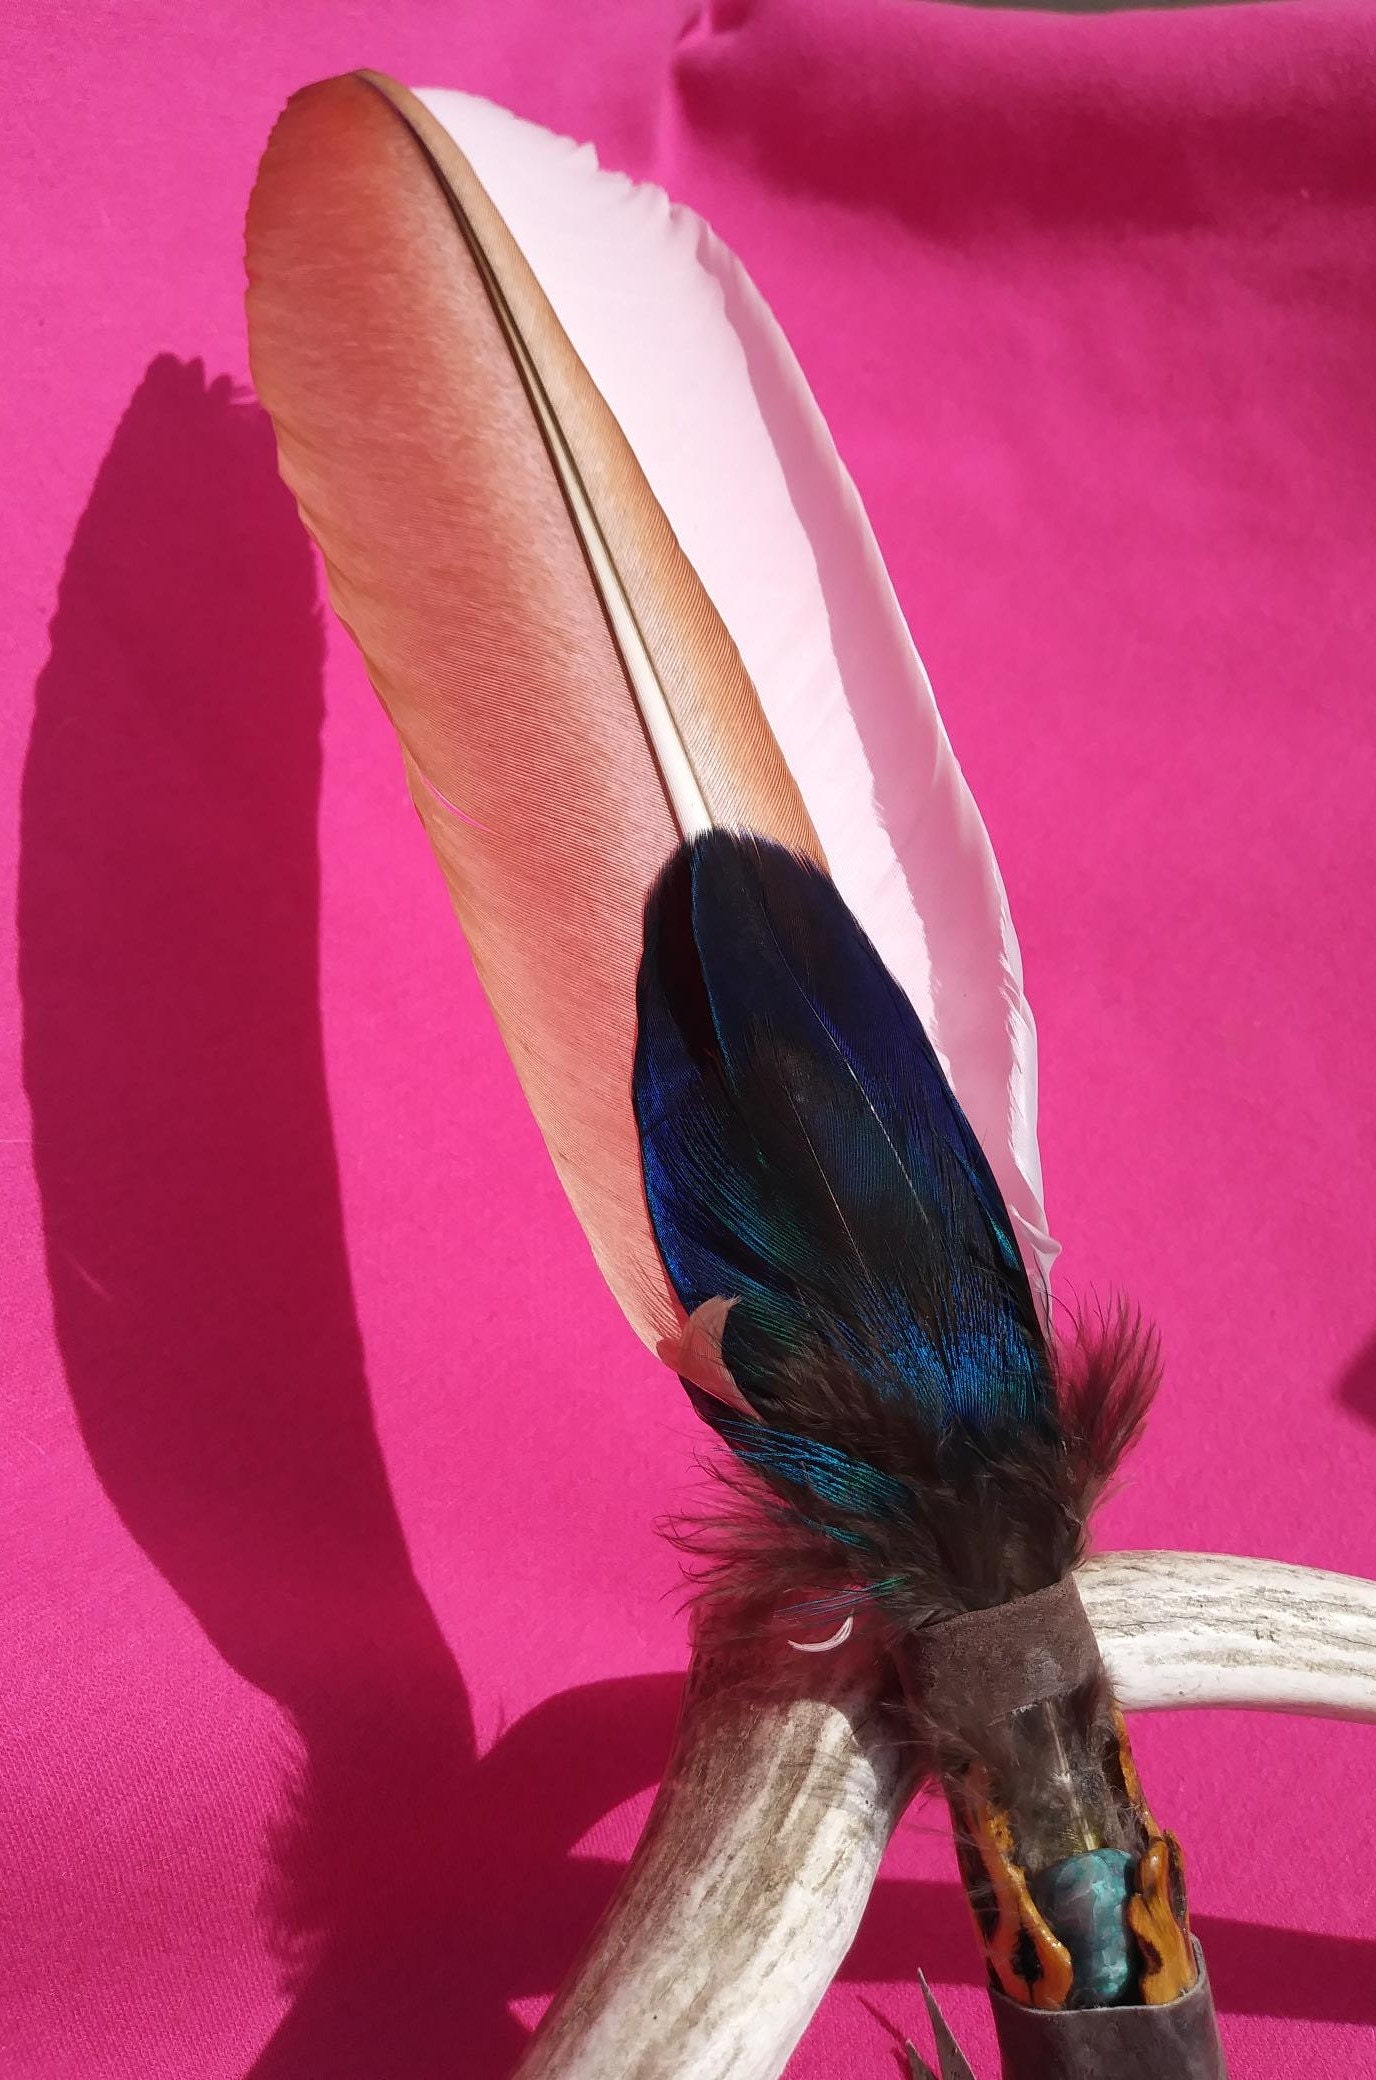 Hand-Crafted Feather Cowboy Hat Hatband - 'Rooster